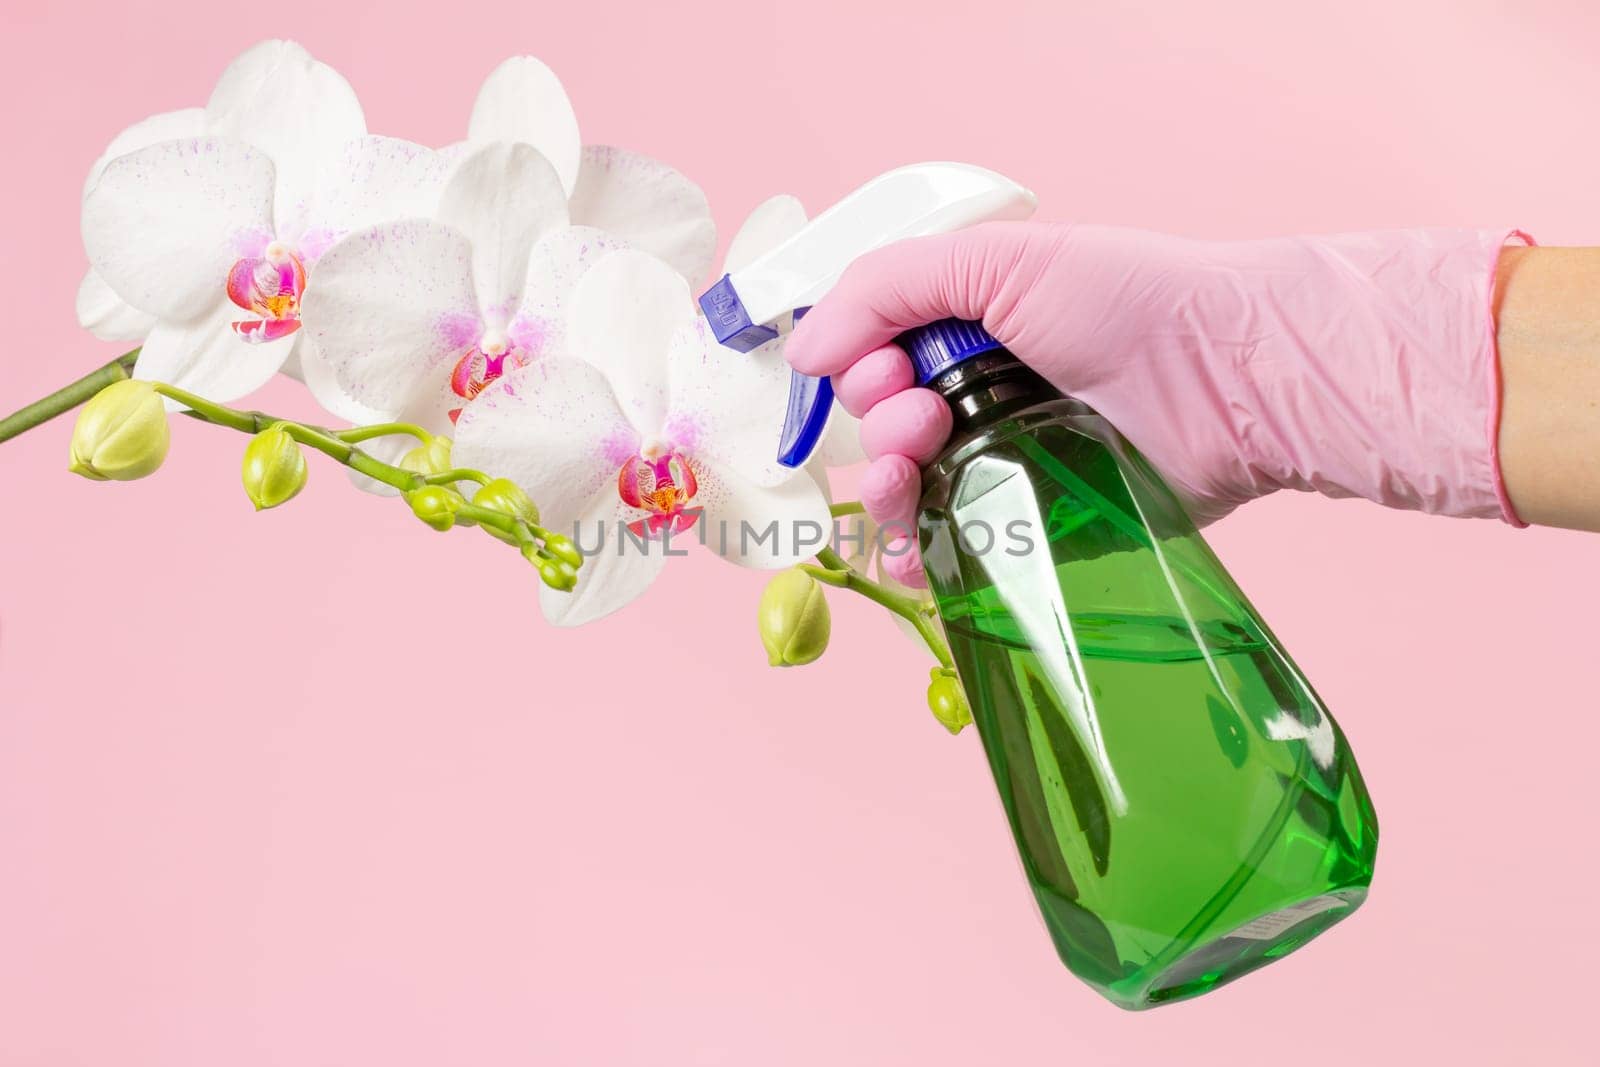 Sprayer and orchid flowers on the pink background. by mvg6894